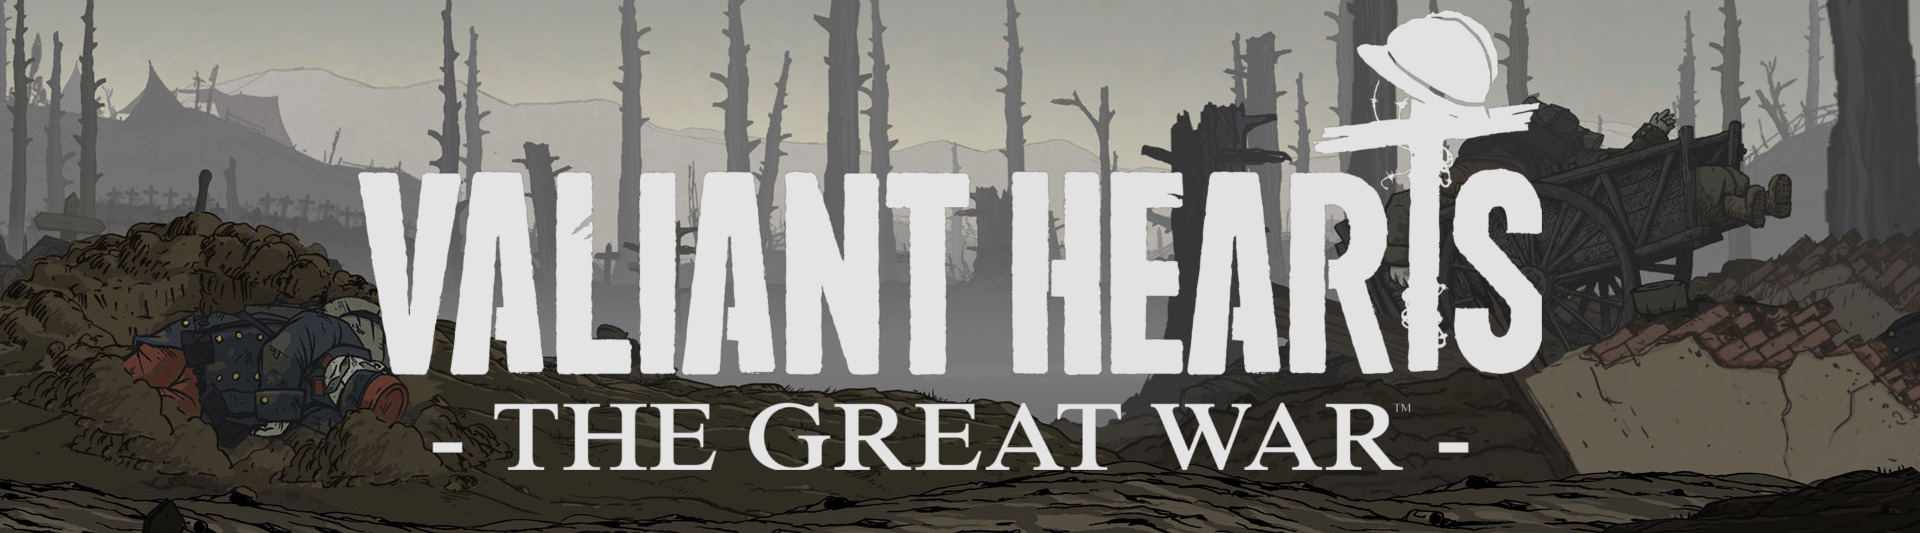 Valiant Hearts: The Great War Details - LaunchBox Games Database